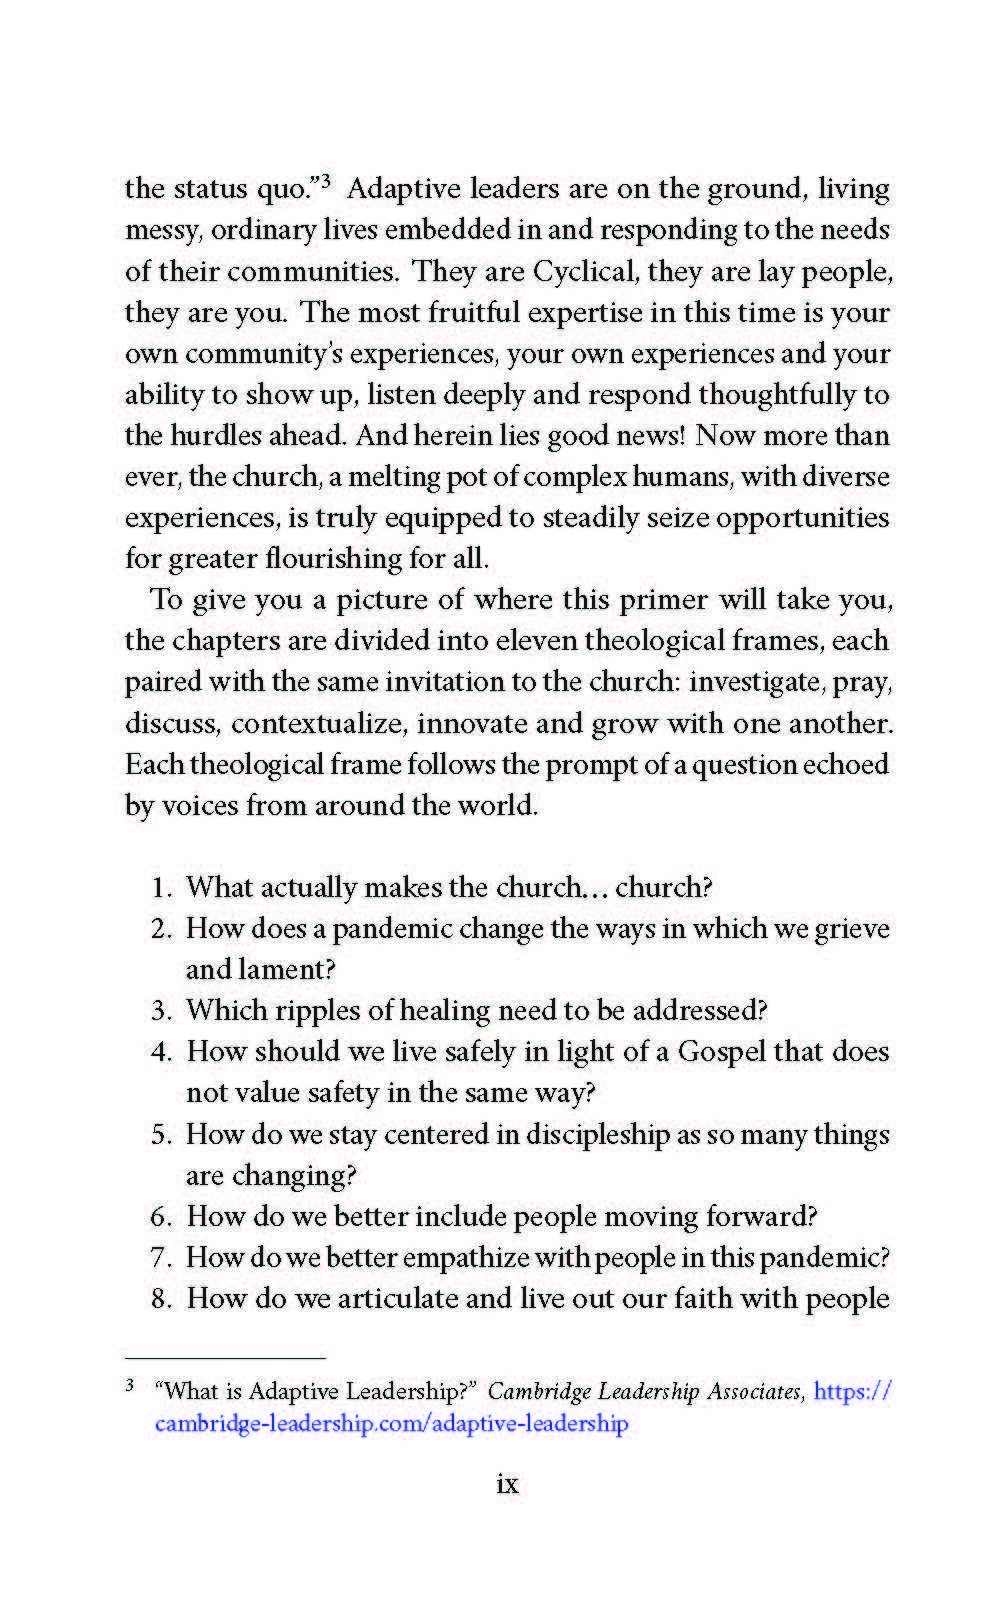 faithful-innovation reader preview_Page_15.jpg